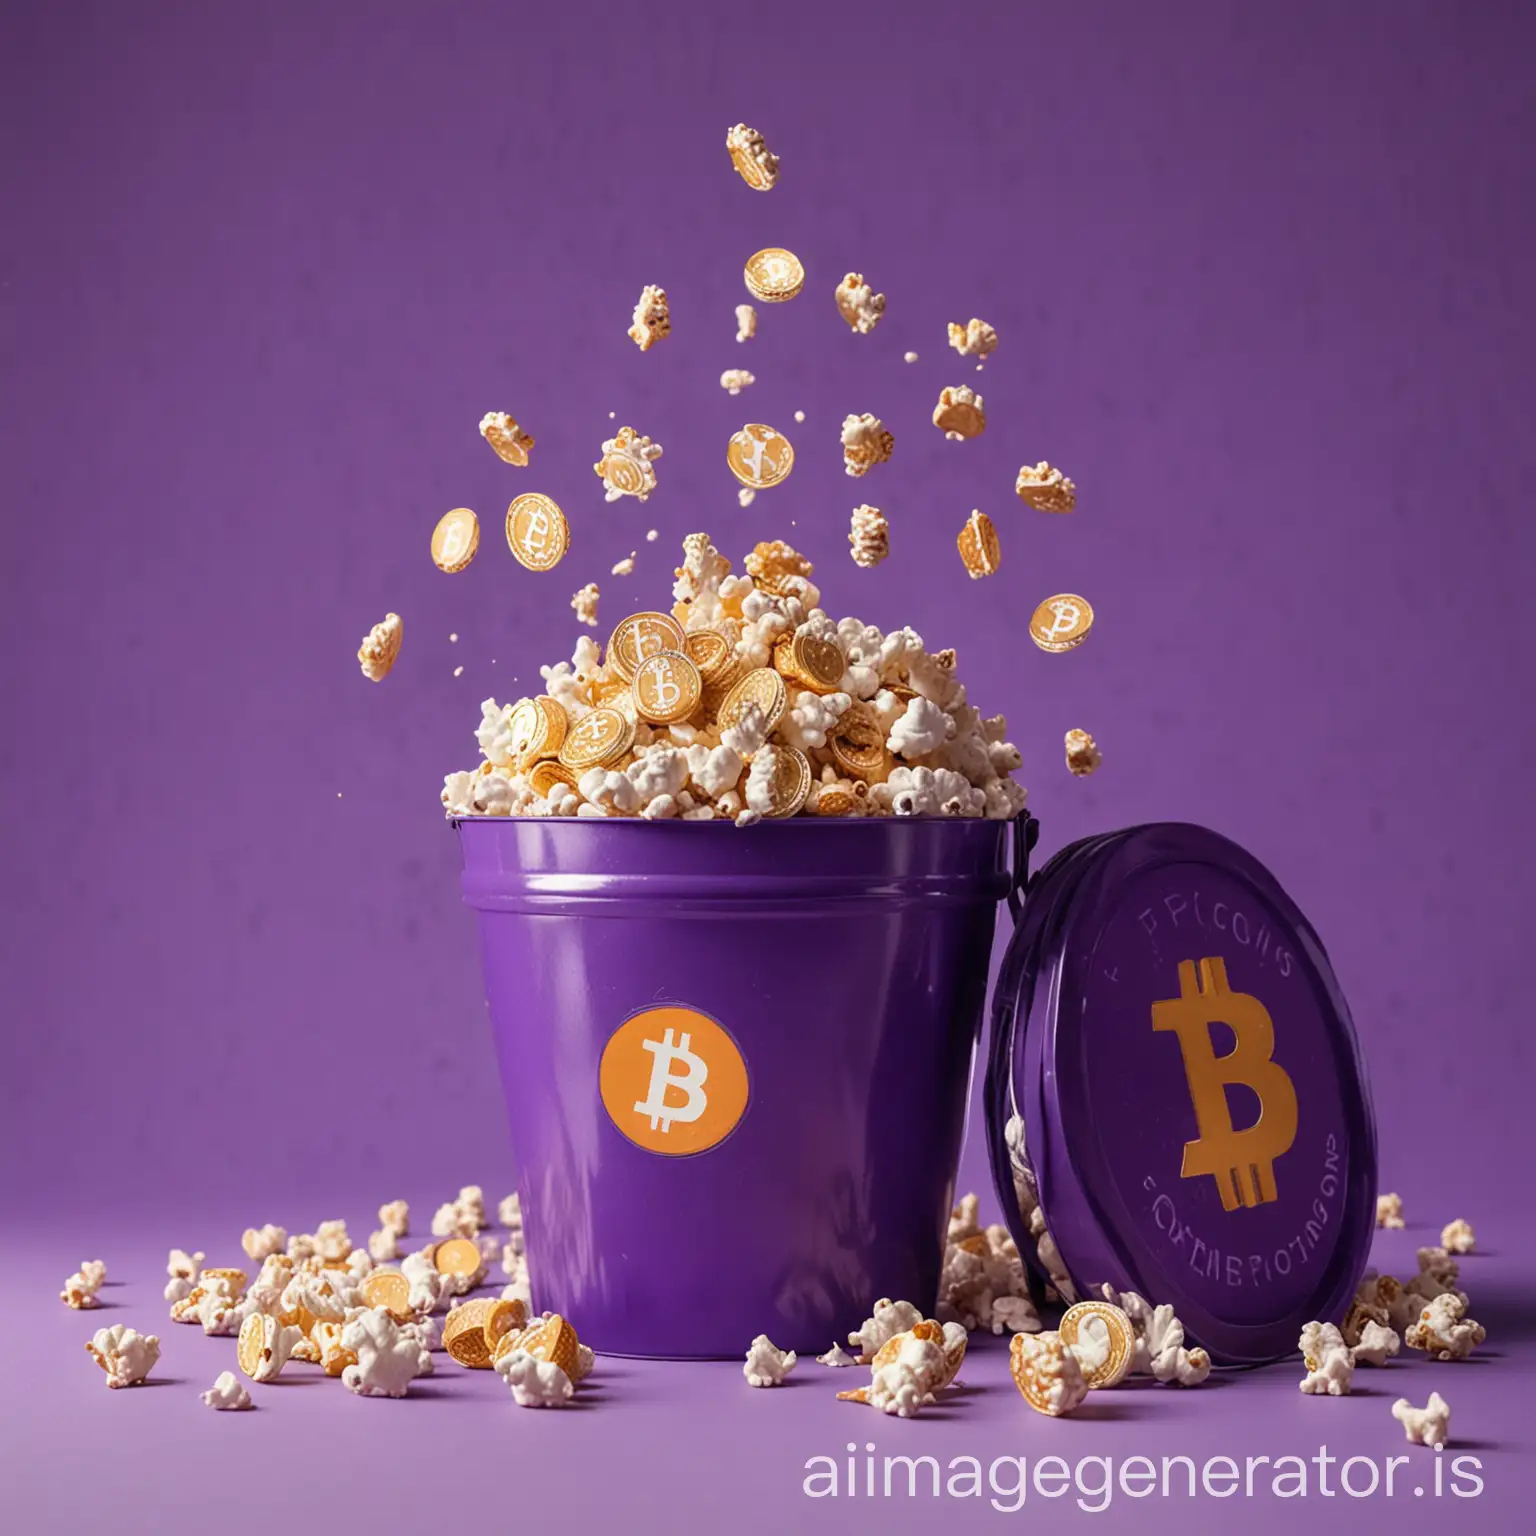 the small and big sizes of bitcoins are inside a popcorn buckets, in purple studio background, som bitcoins are suspended in atmosphere
